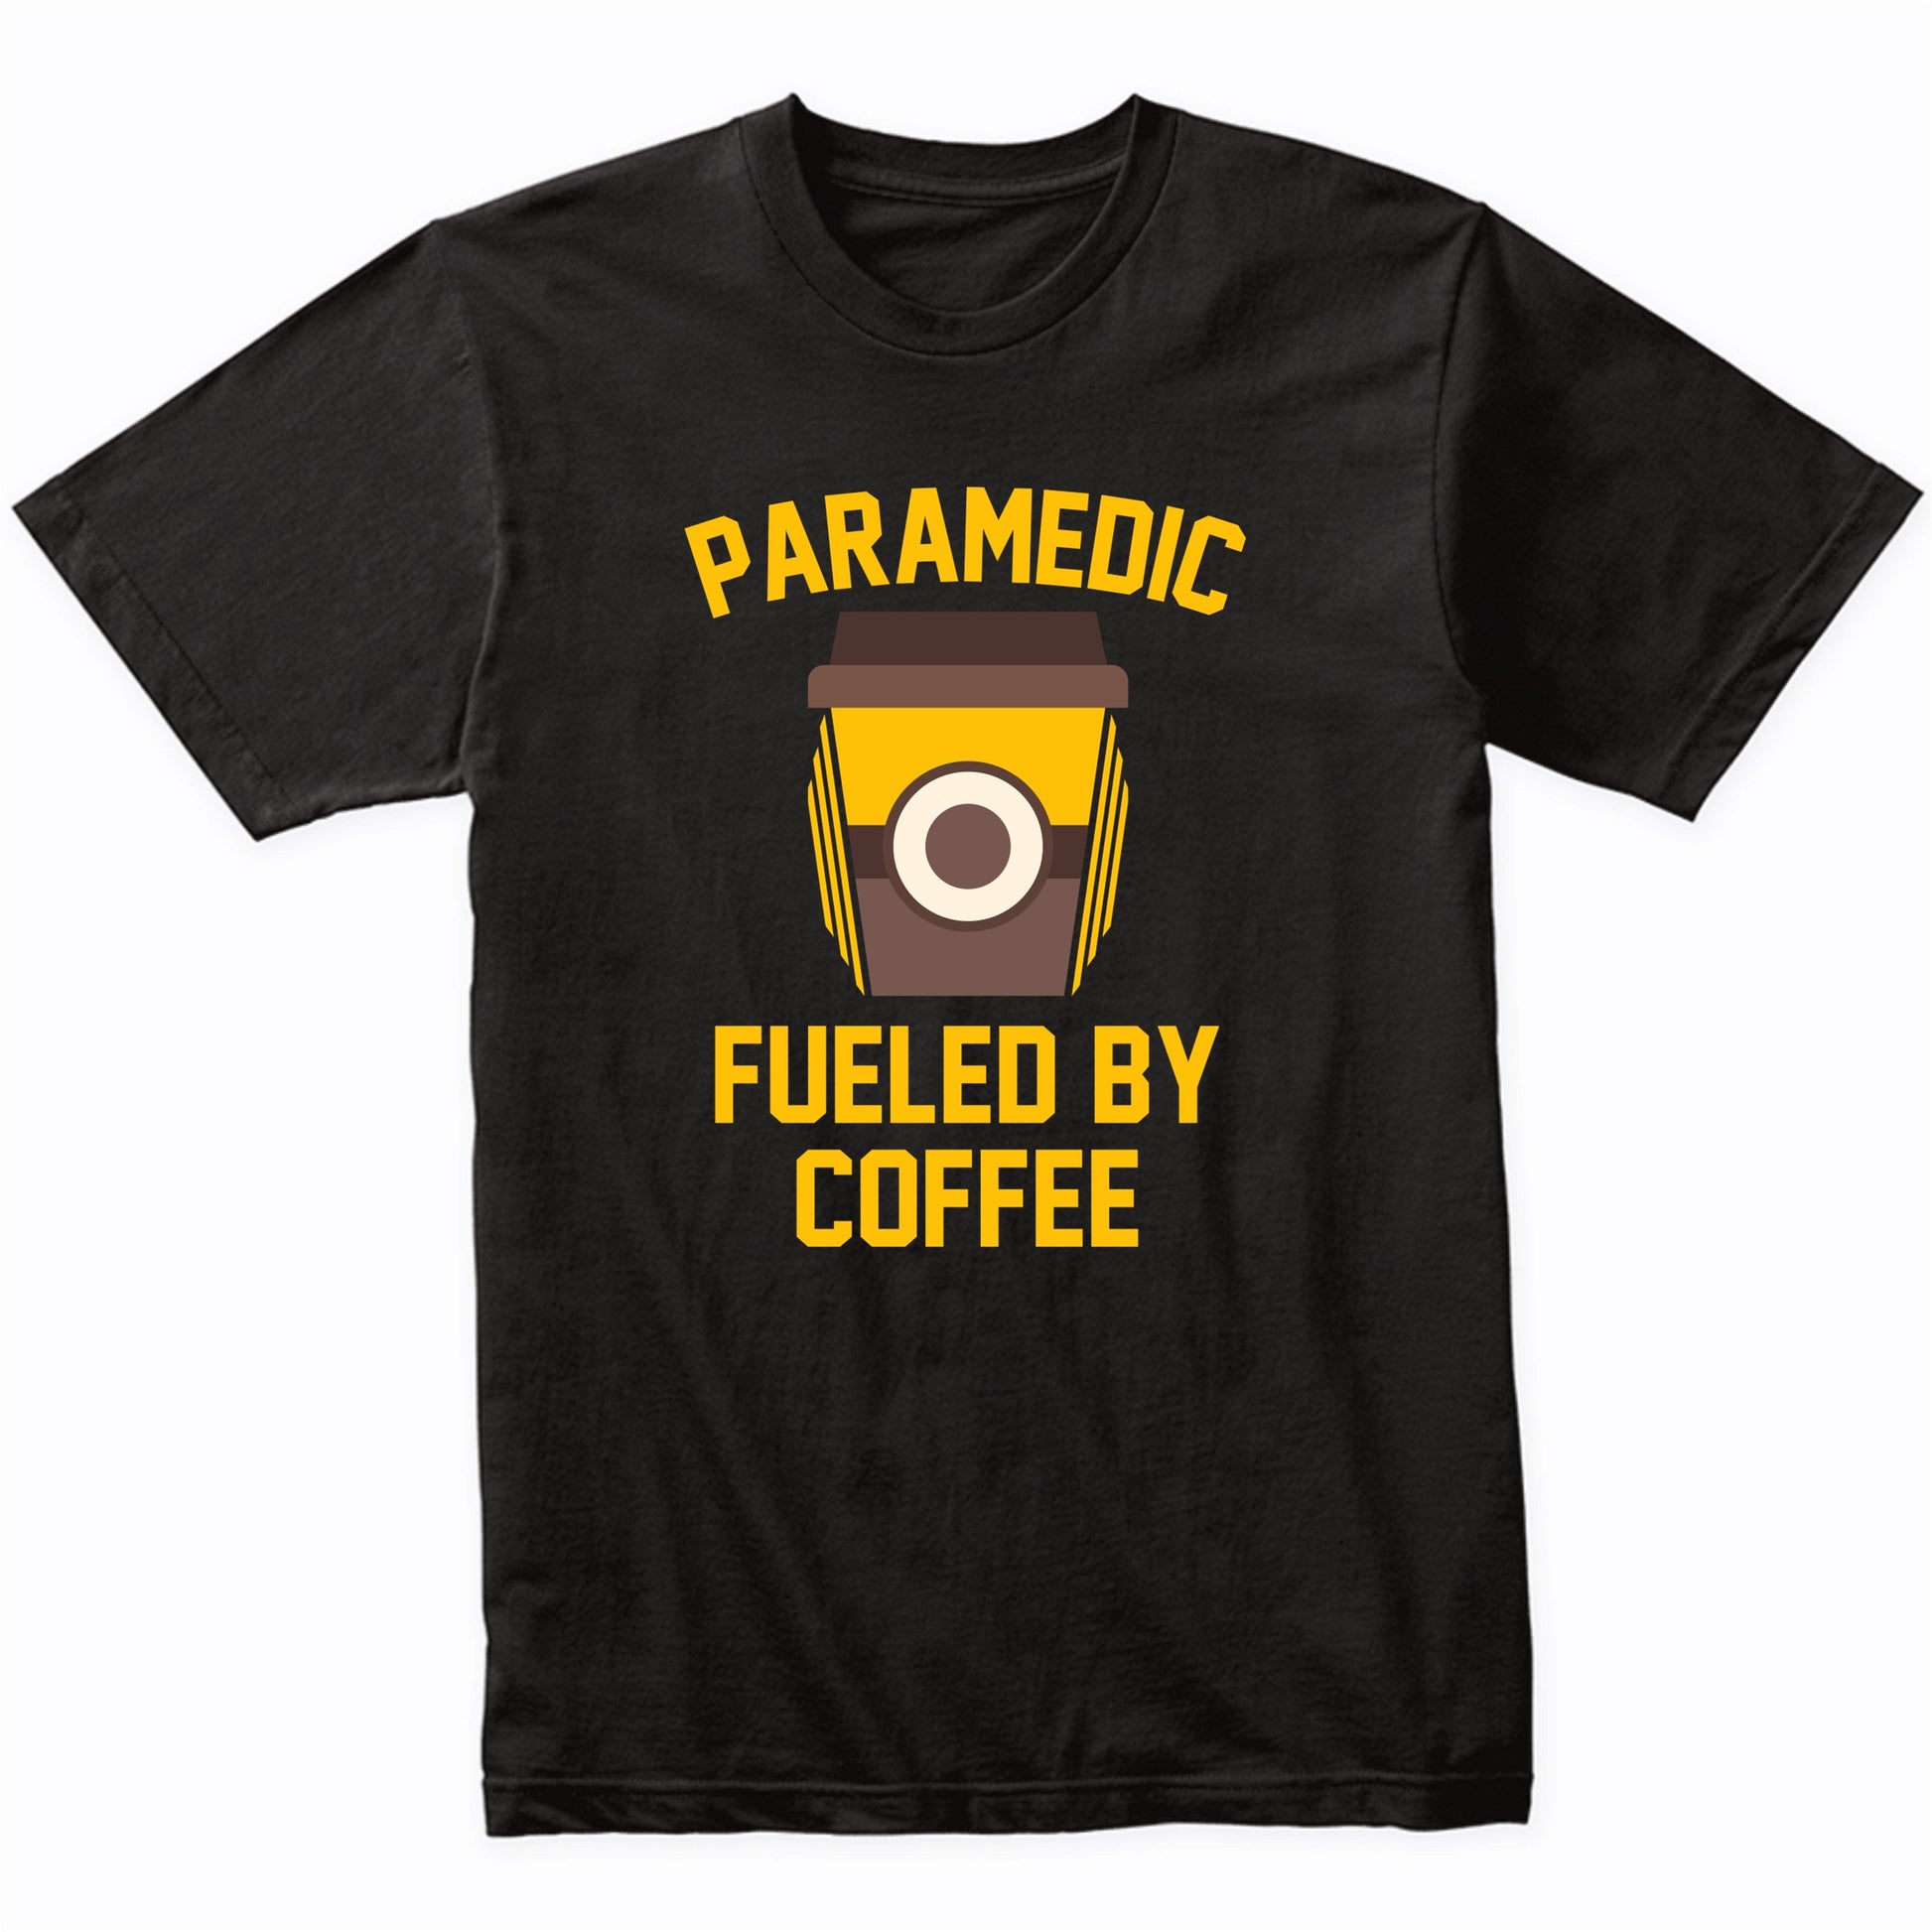 Paramedic Fueled By Coffee Funny Shirt